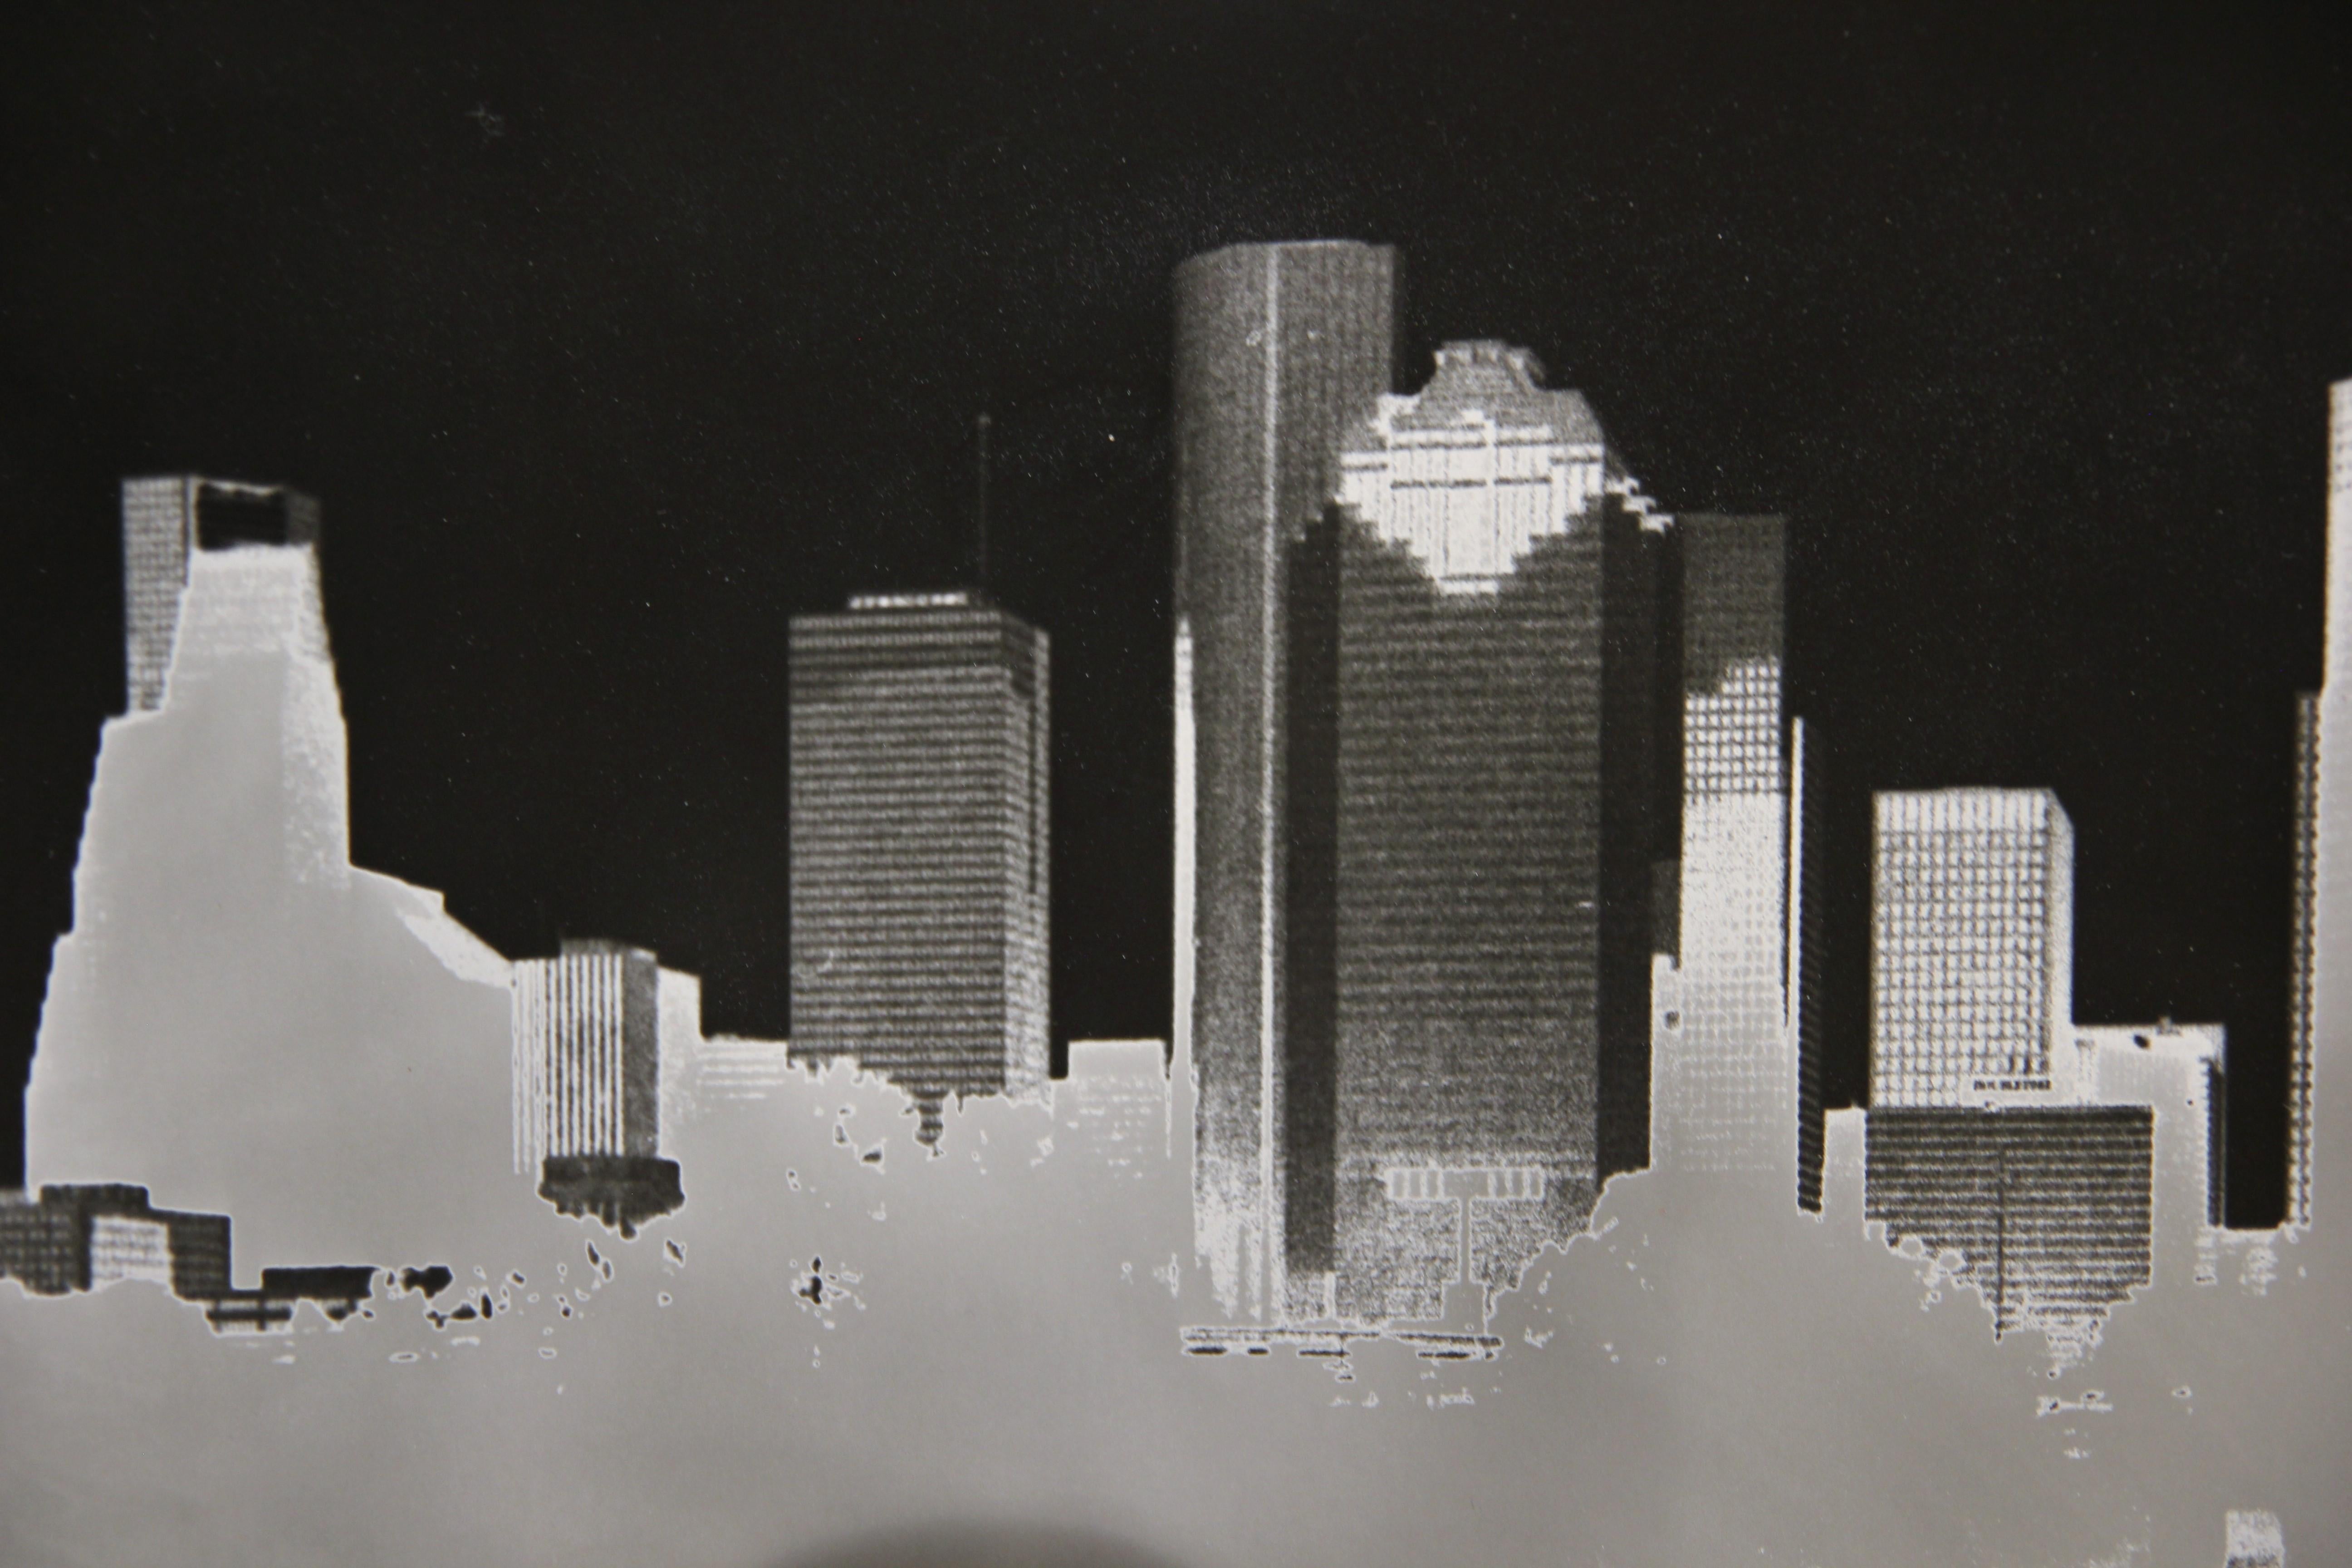 This photograph is a picture of the Houston skyline with a mirrored image of the skyline below. This photograph showcases the Sabbttier process or the results of solarization. The photograph is not framed.

Artist Biography: Pat Truax is a Texas